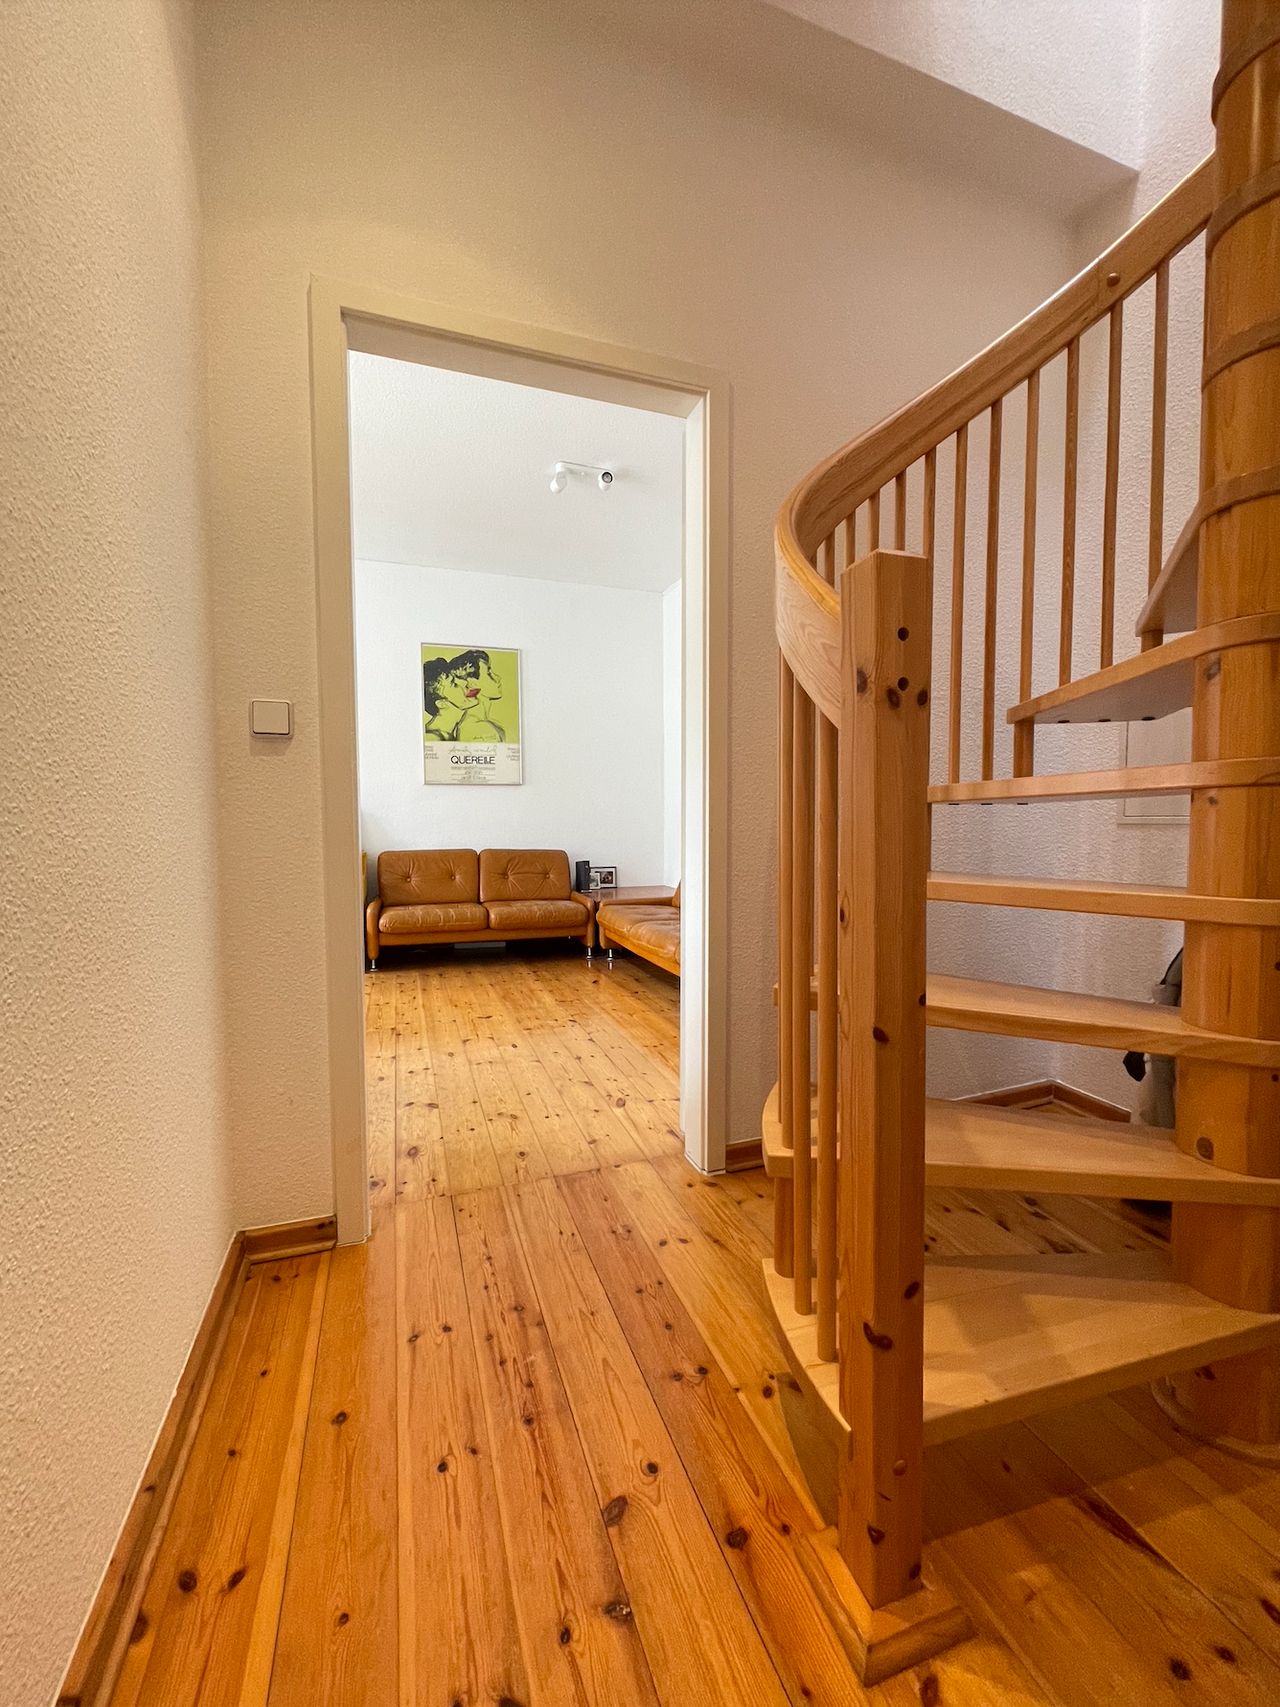 Sunny apartment on 2 floors in the heart of Mitte